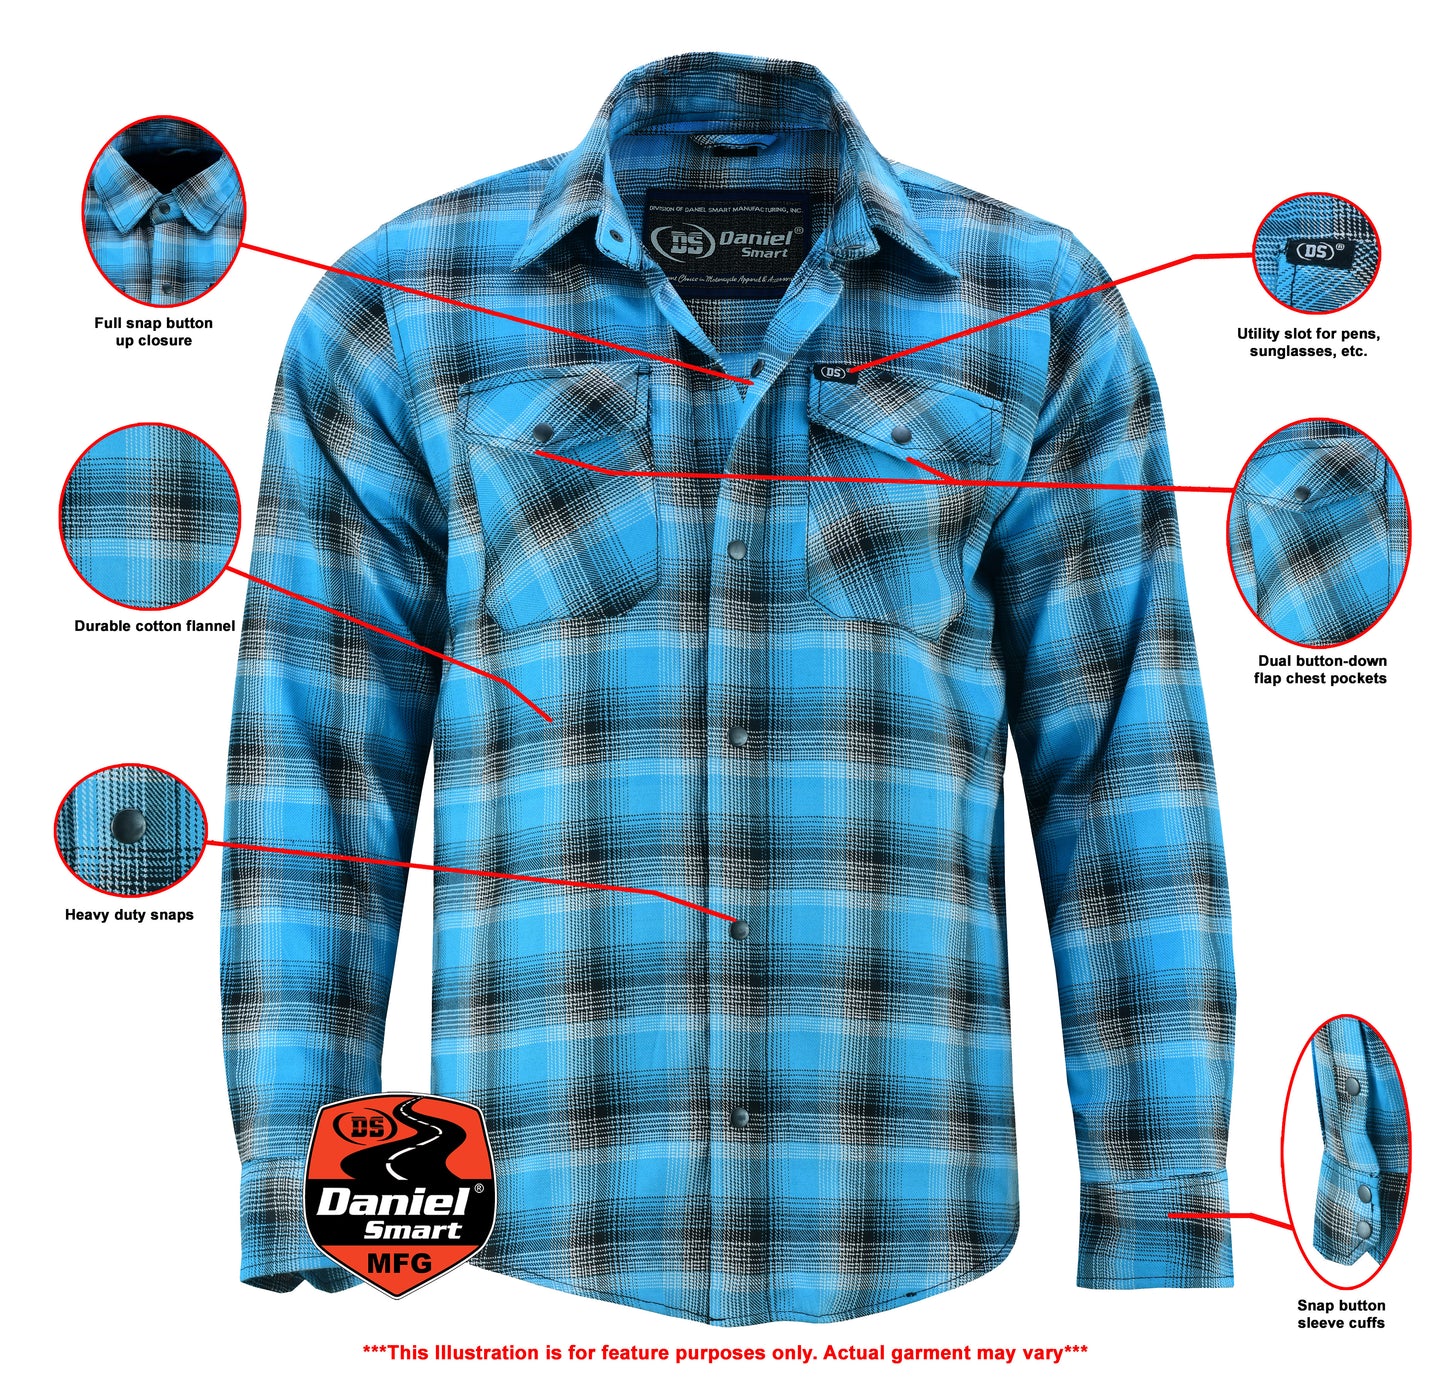 Flannel Shirt - Blue and Black Shaded